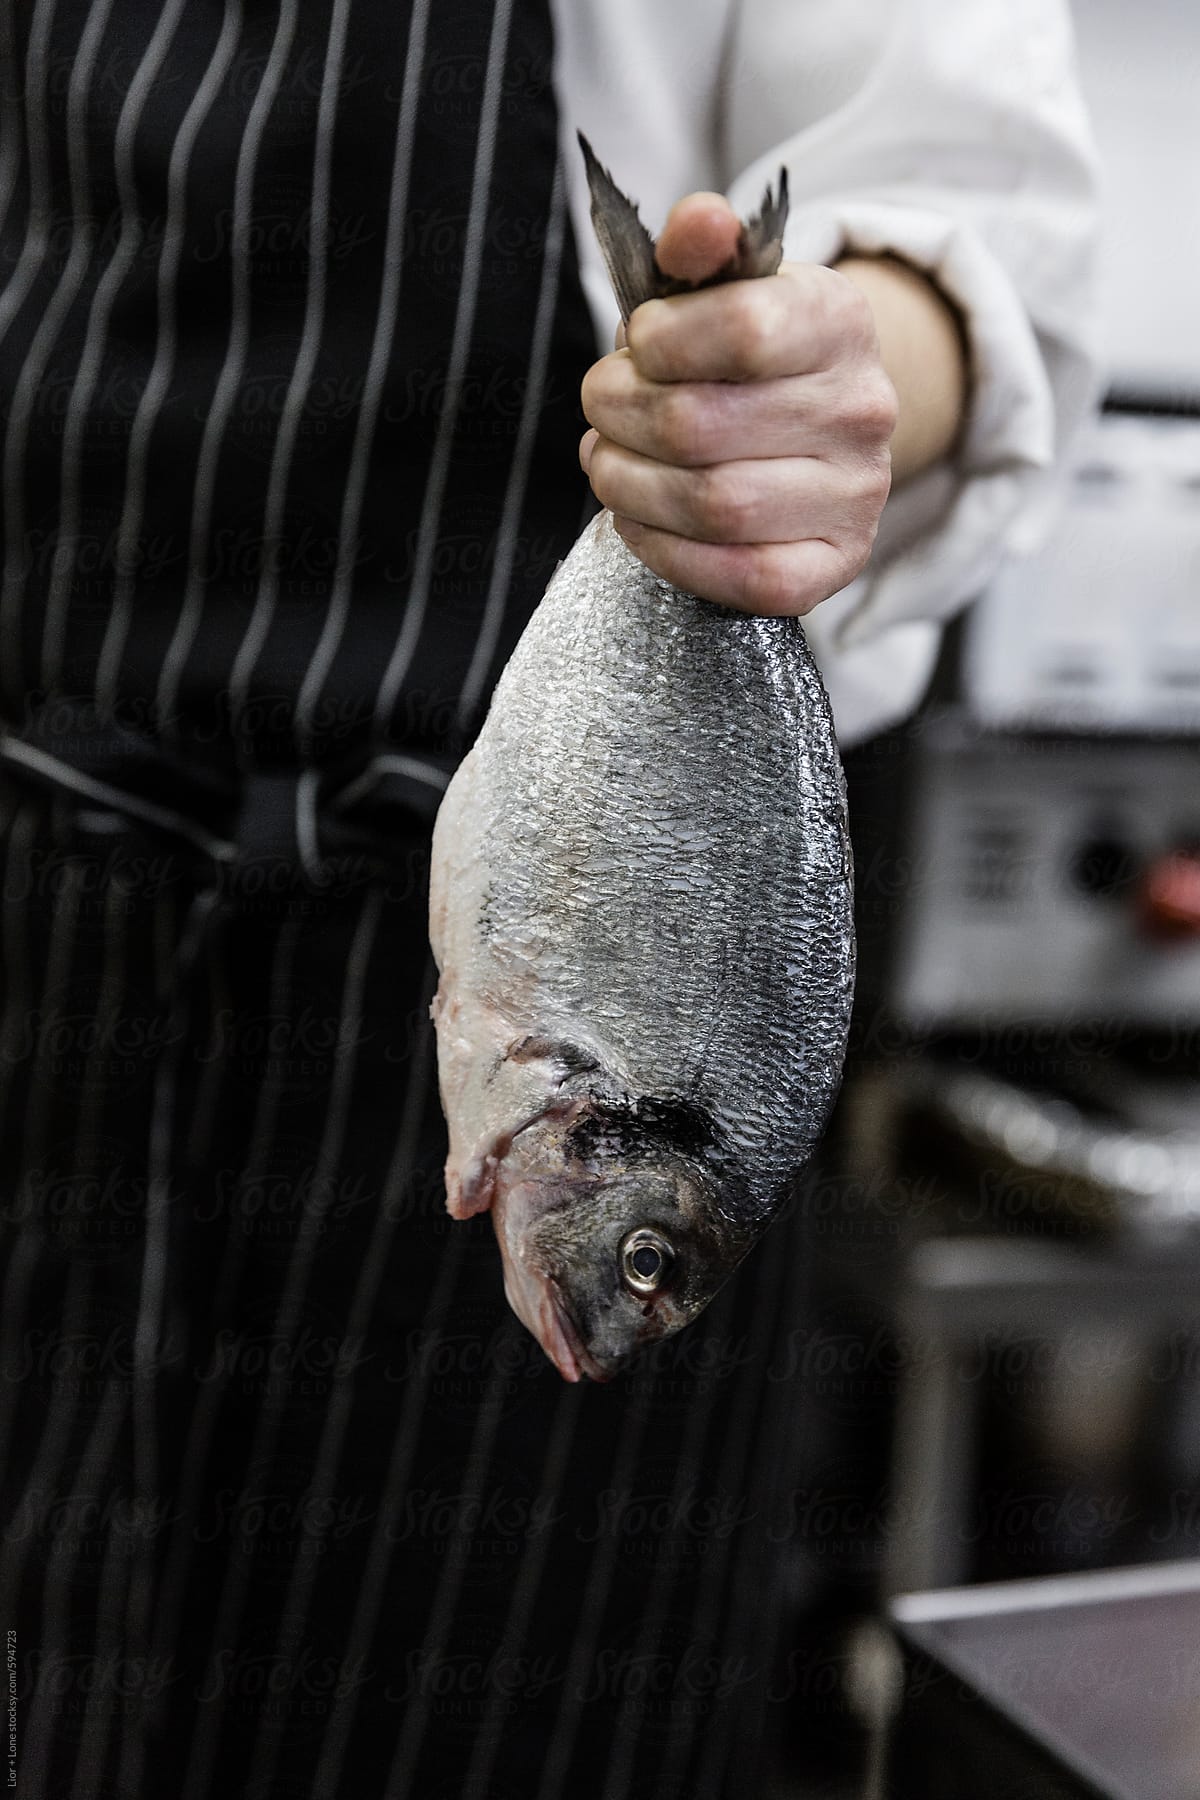 Chef holding fresh raw fish in his hand